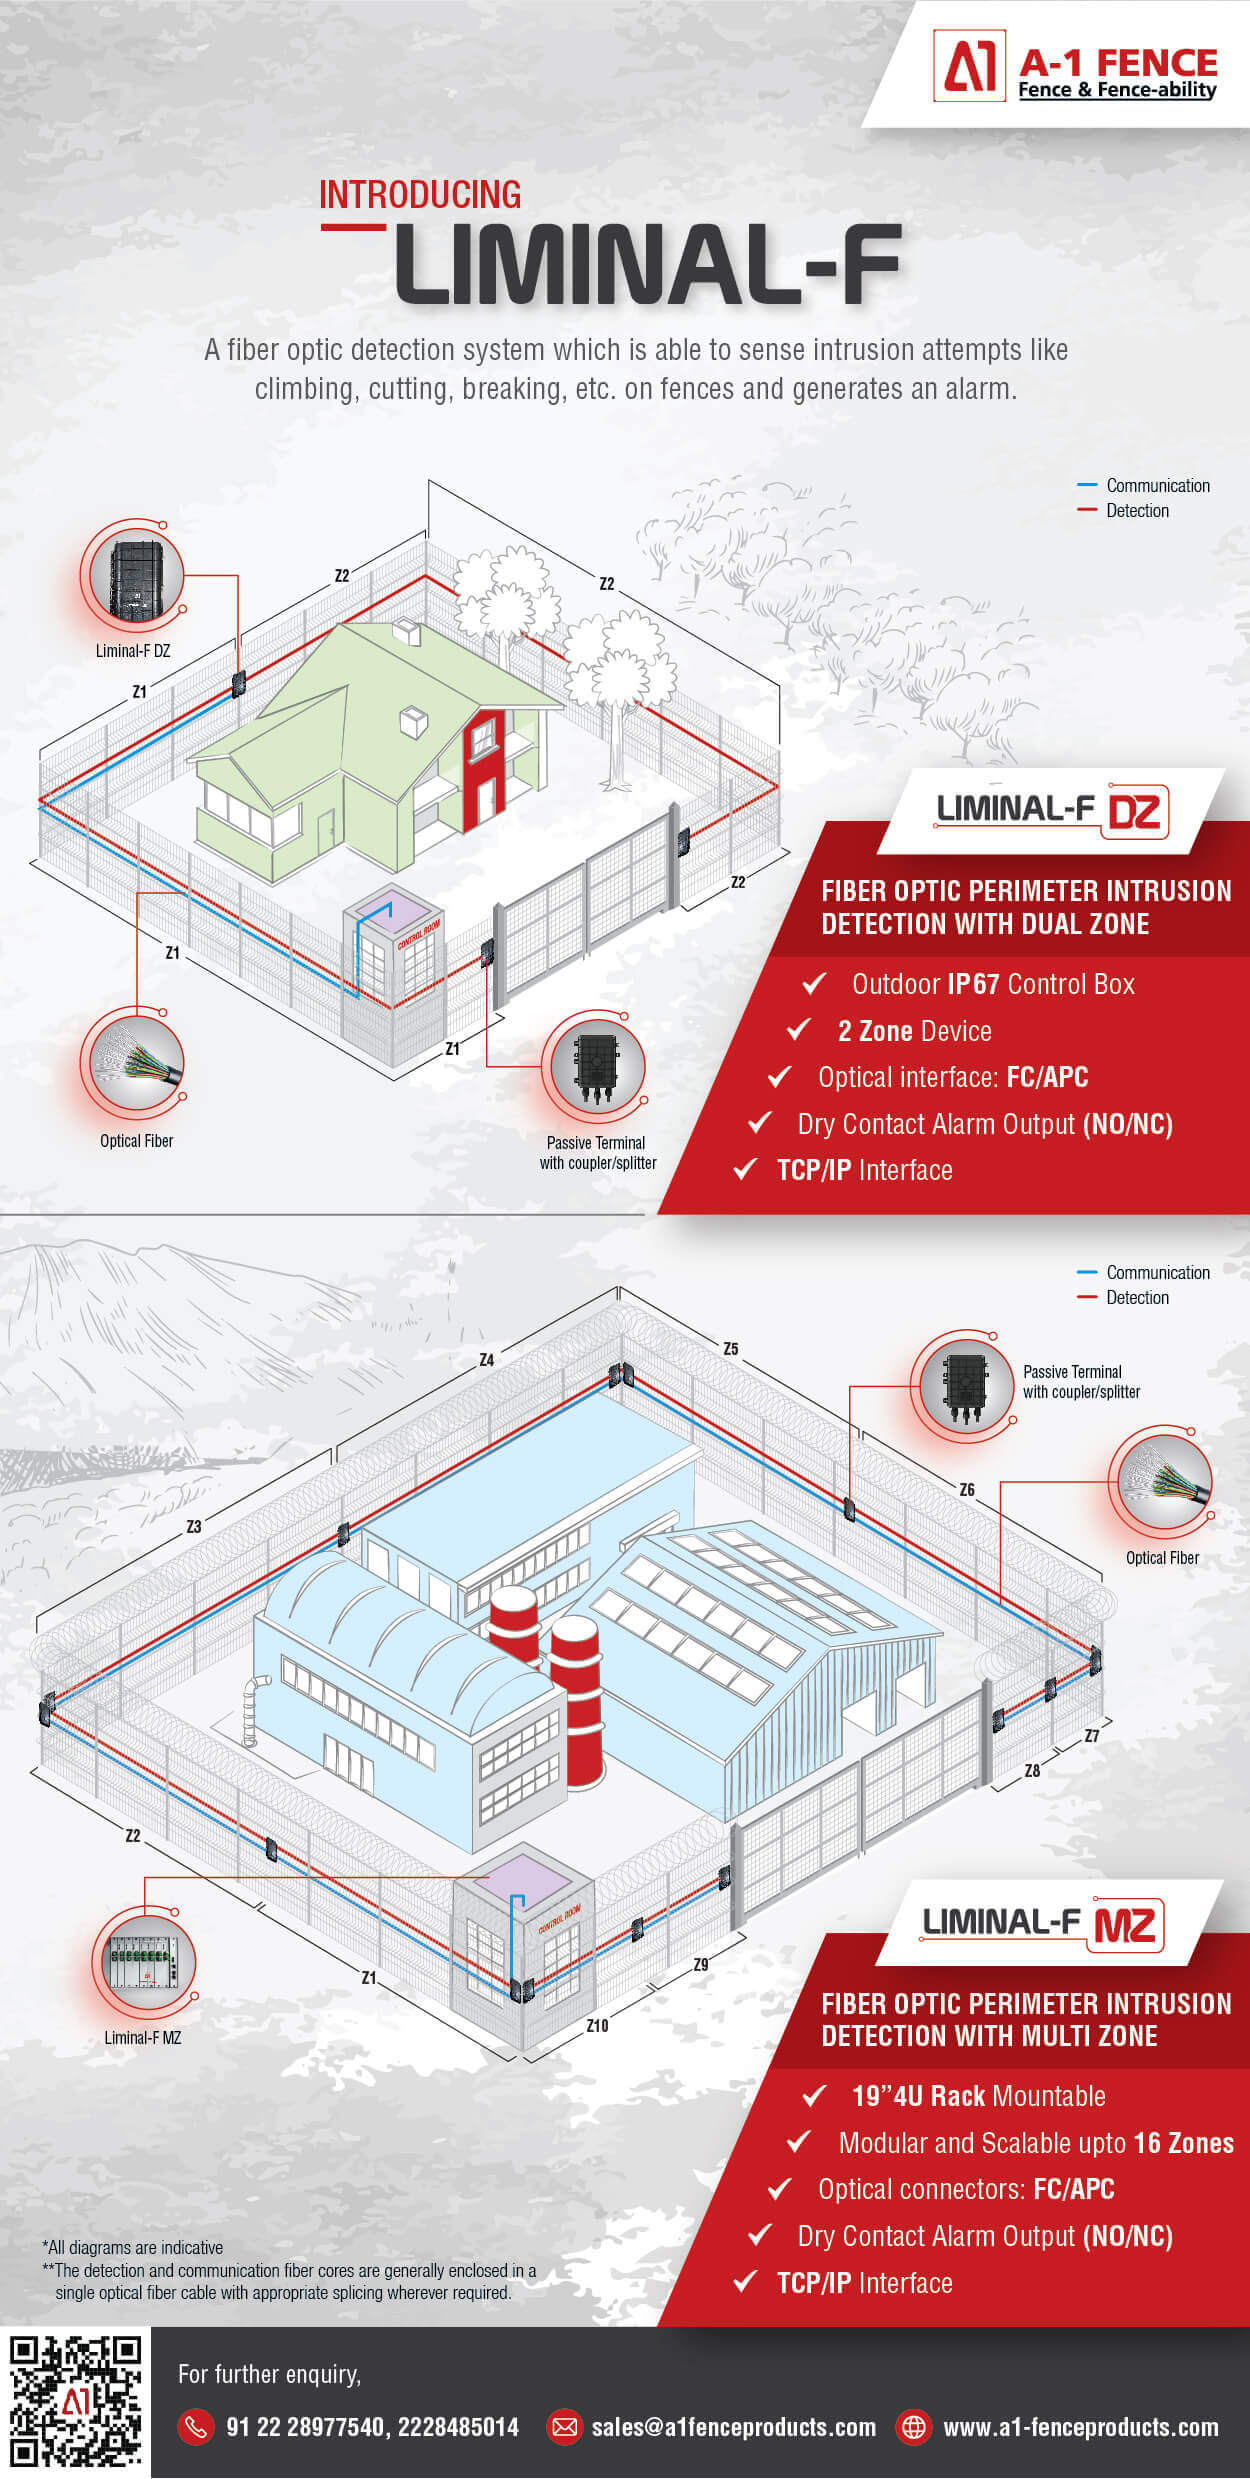 Introducing Liminal-F - perimeter intrusion detection system